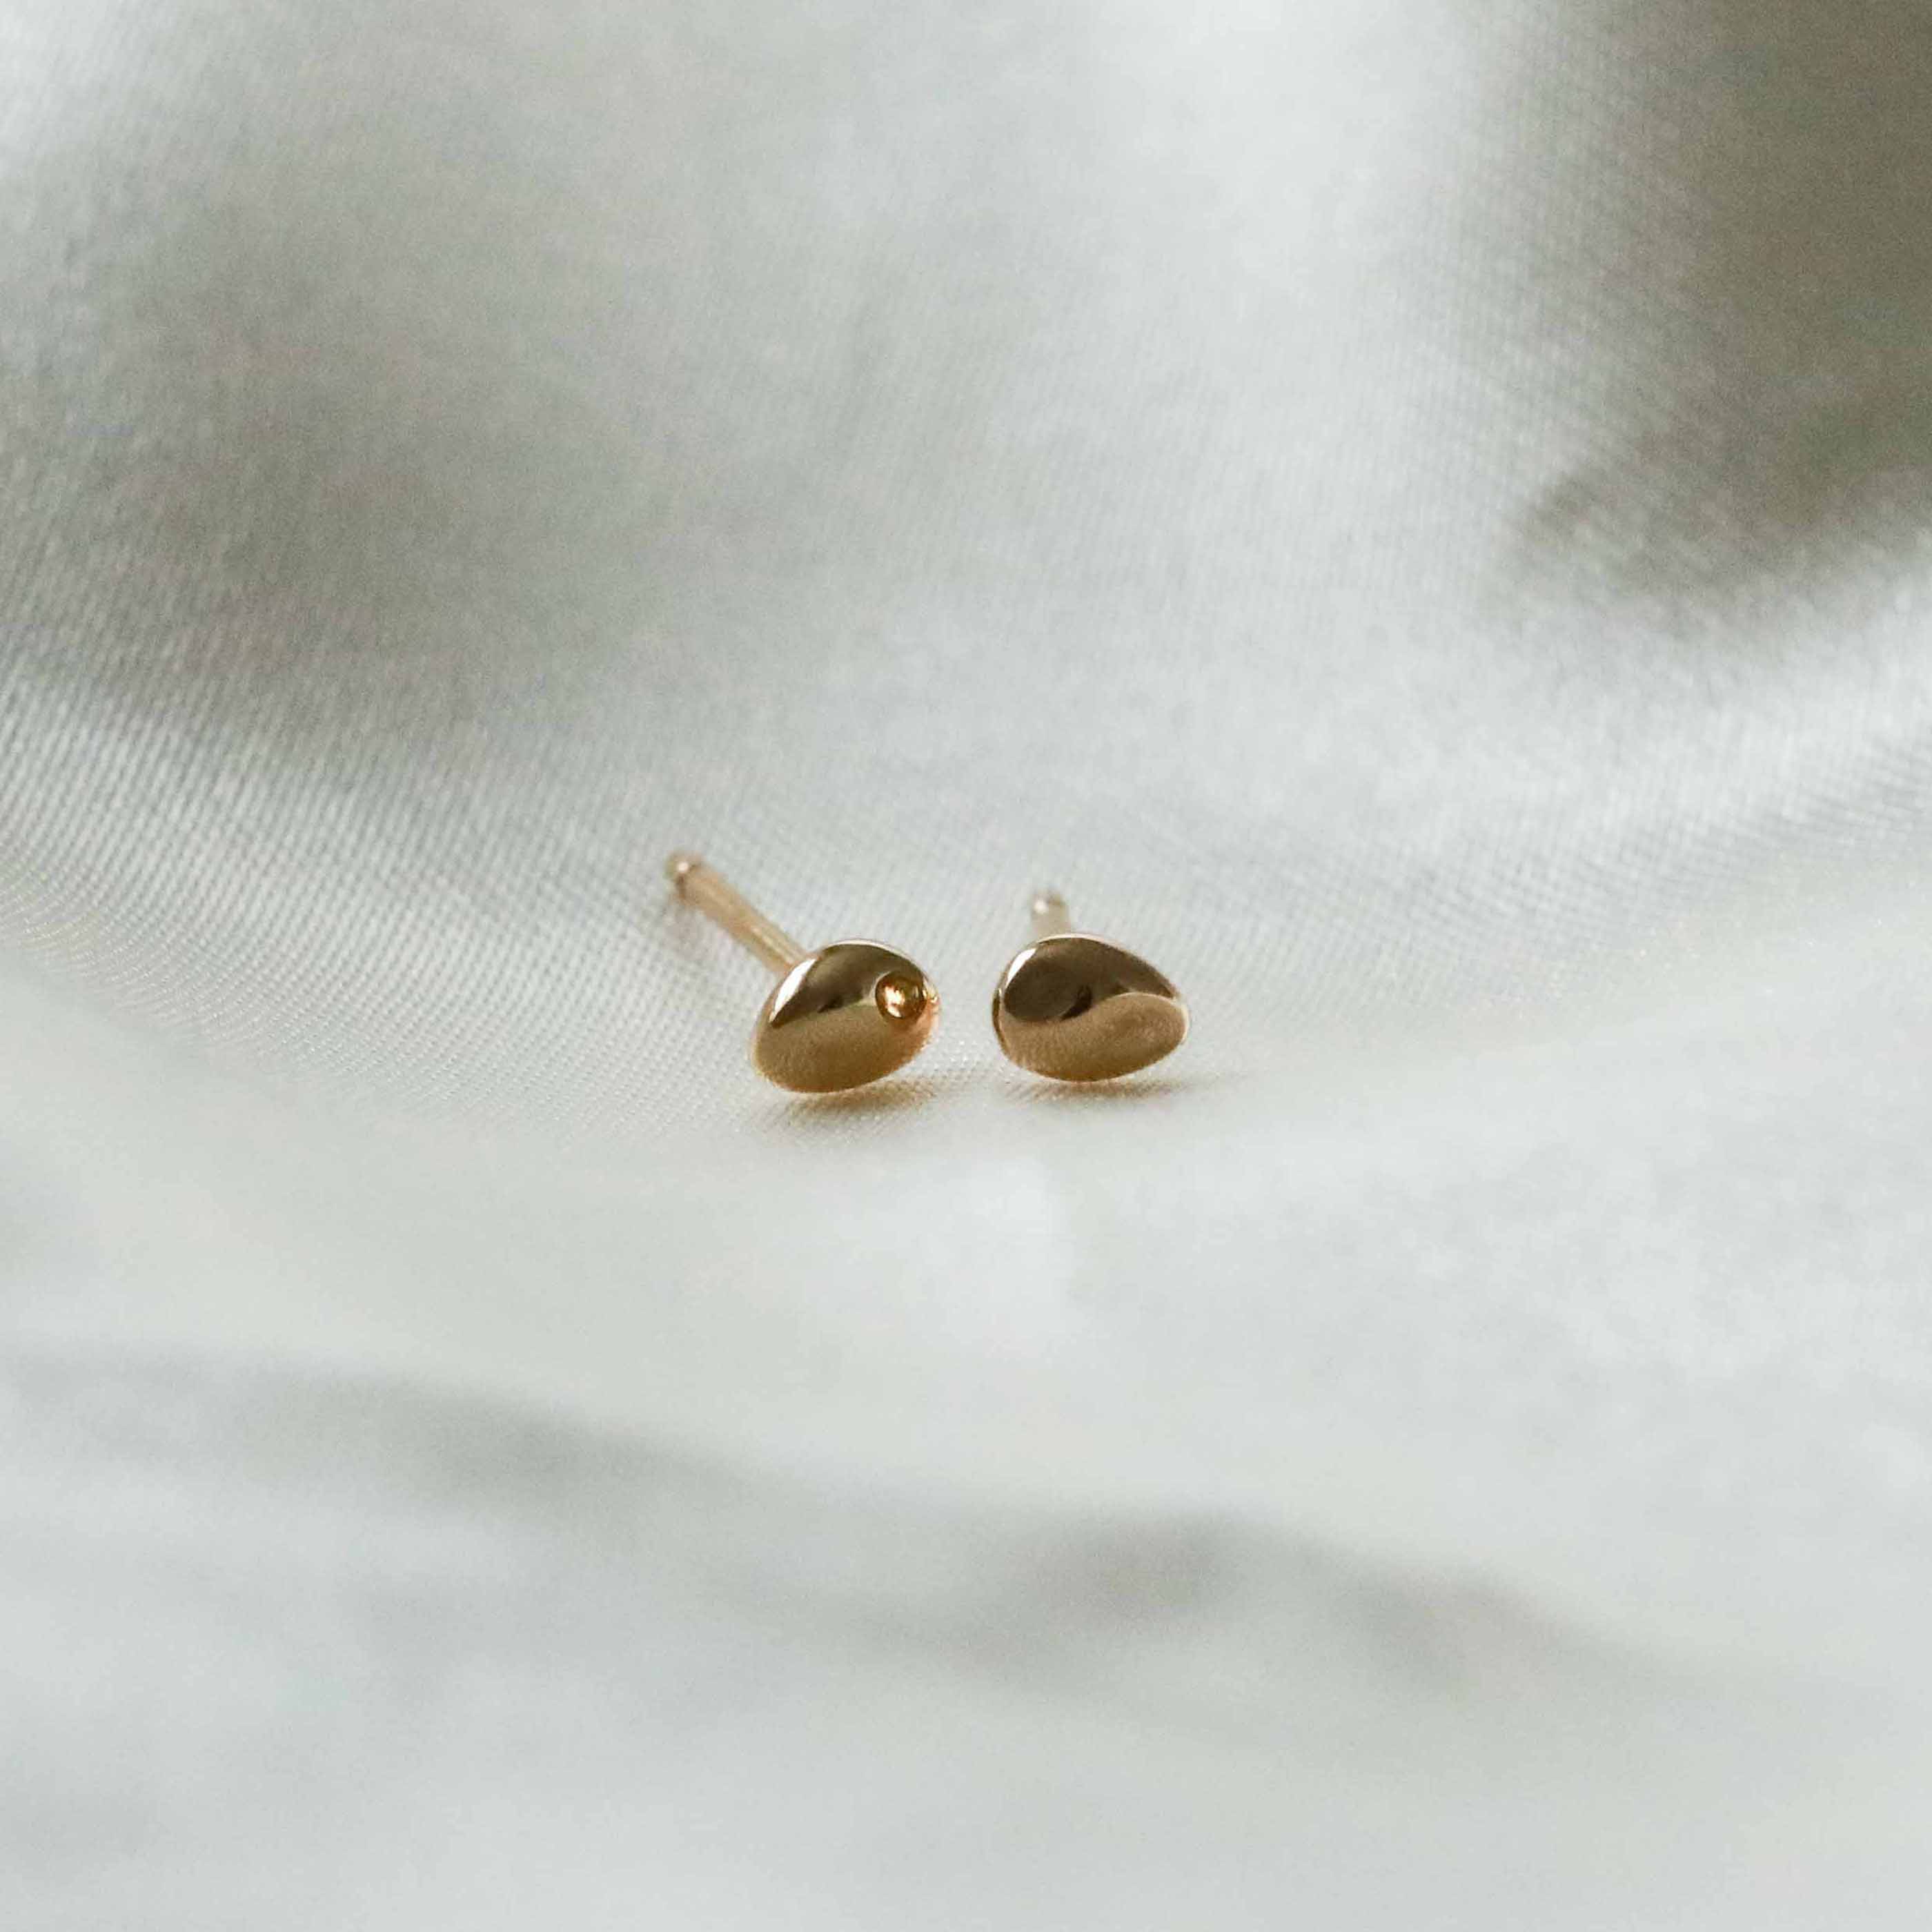 Flat lay shot of Molten Small Stud Earrings in Gold